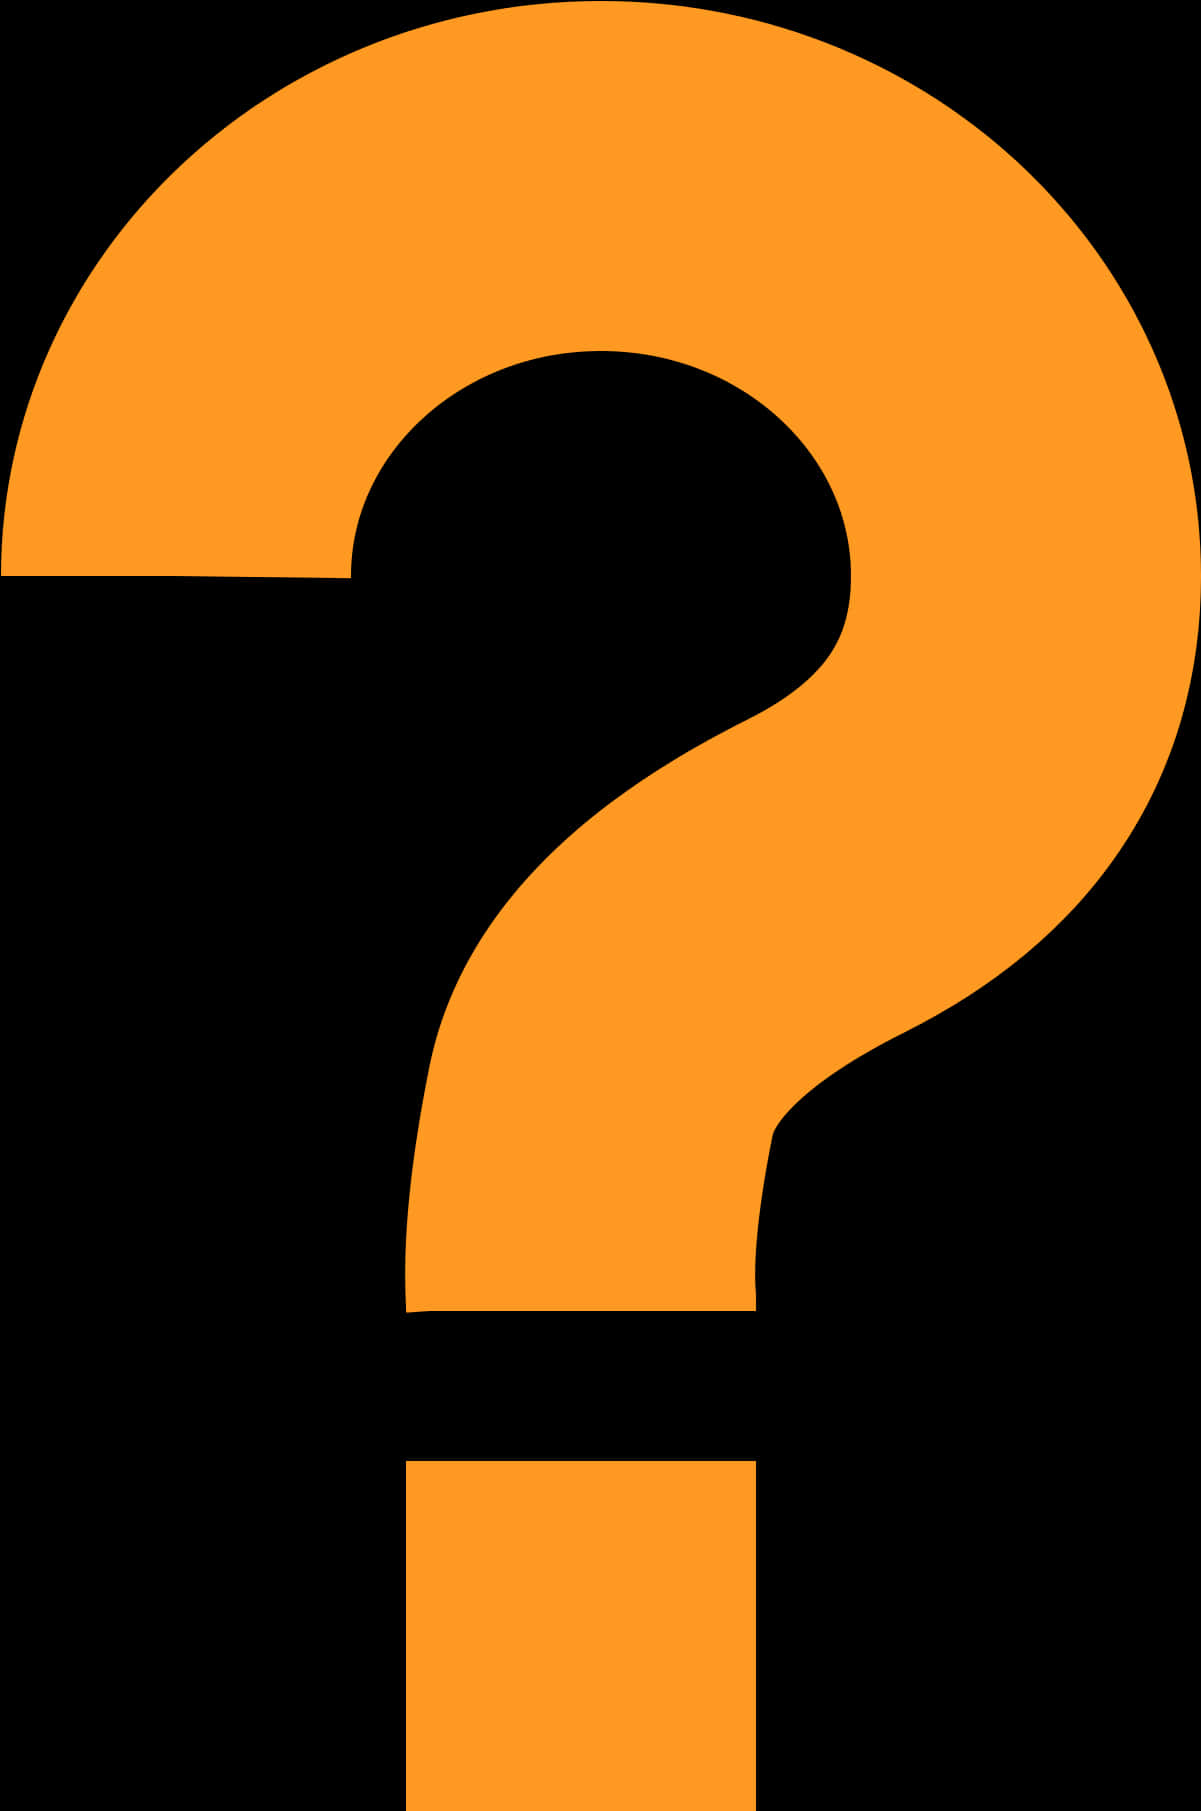 Orange Question Mark Graphic PNG